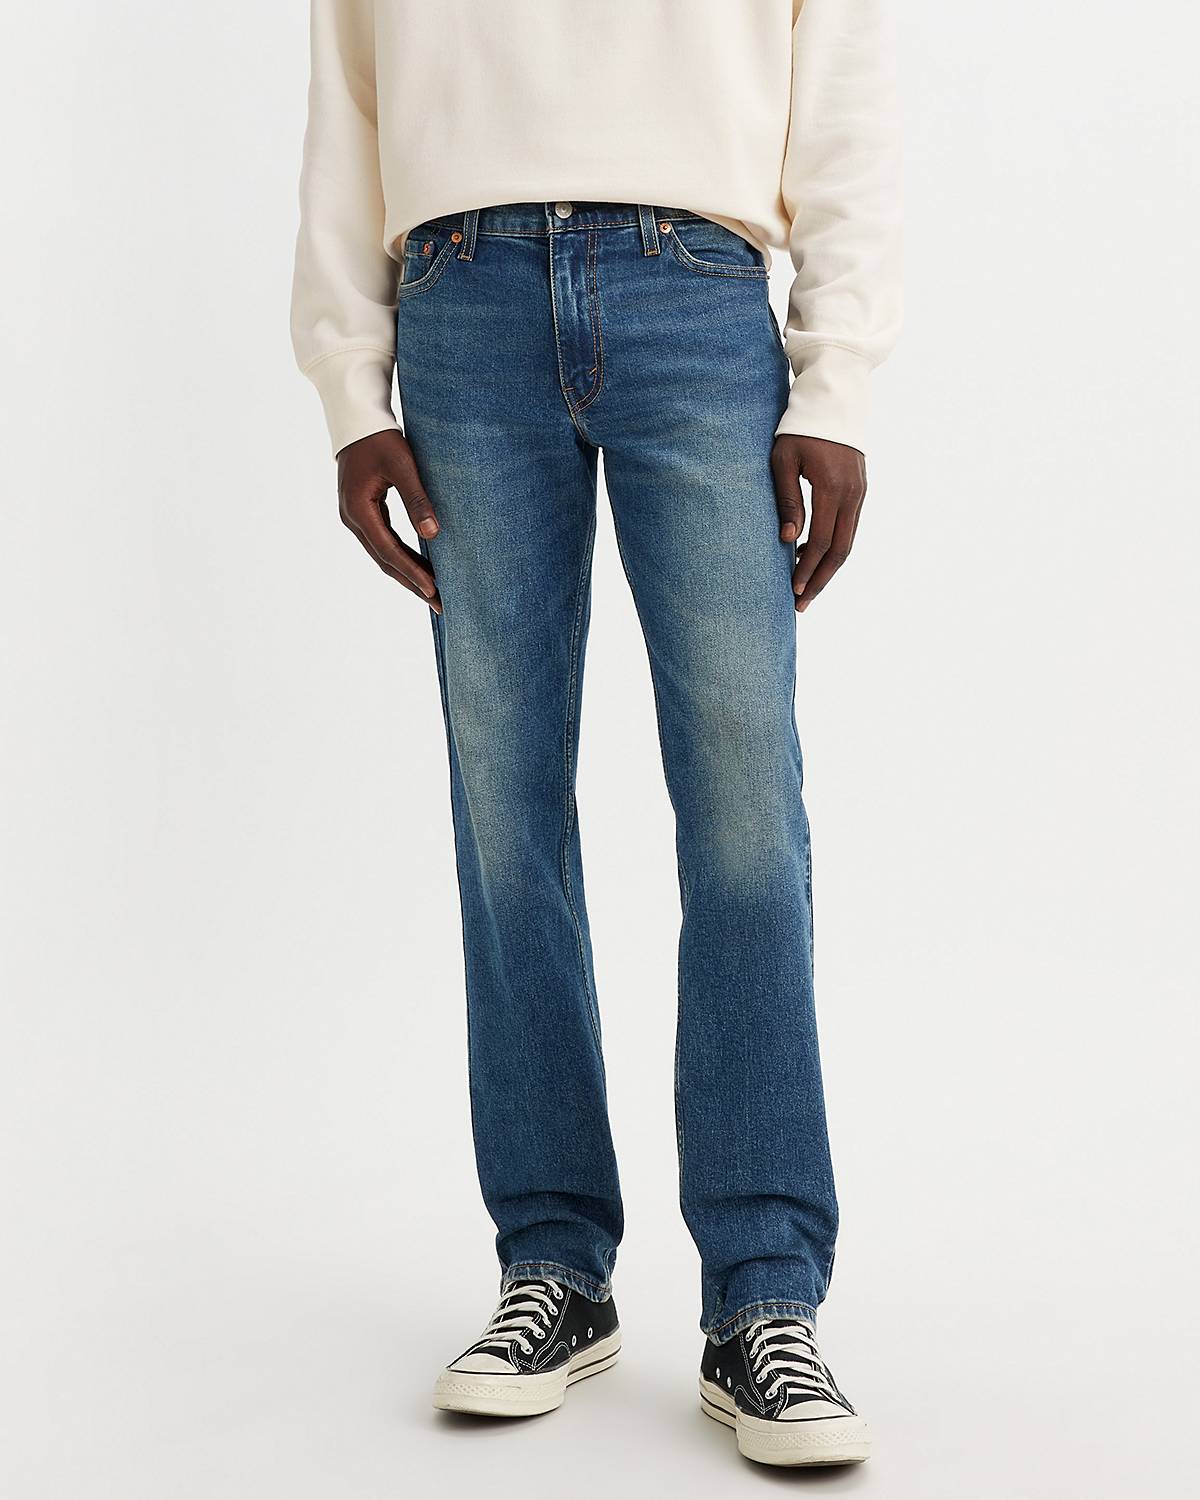 Levi's Hi-Ball Roll Jeans - Men's - Two Pointer 32x36